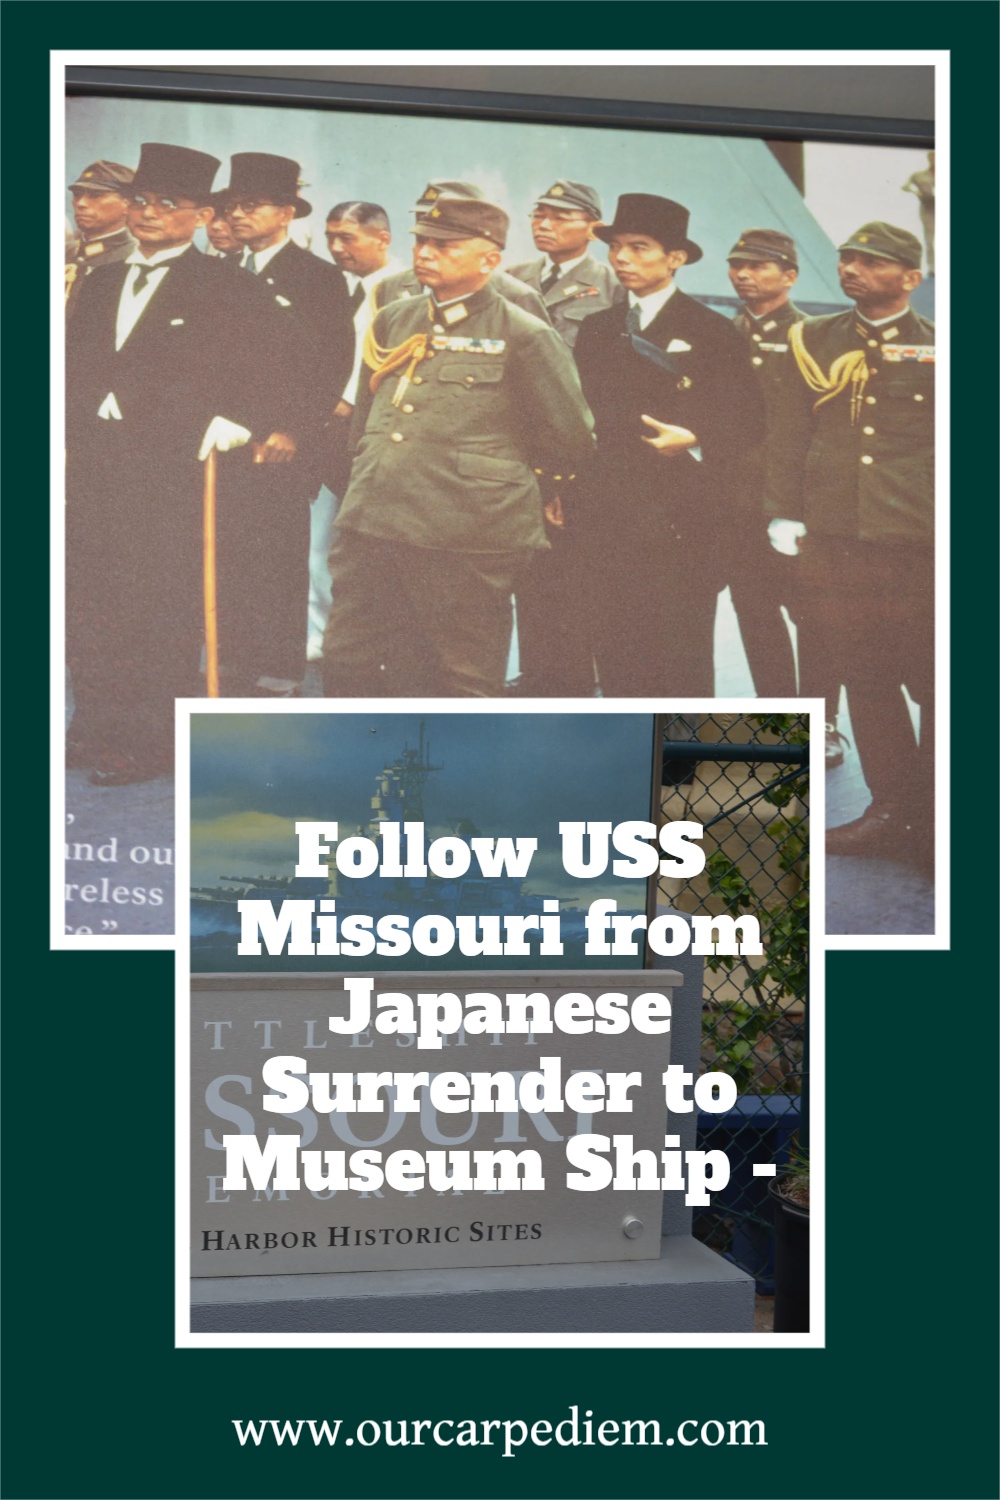 Follow USS Missouri from Japanese Surrender to Museum Ship